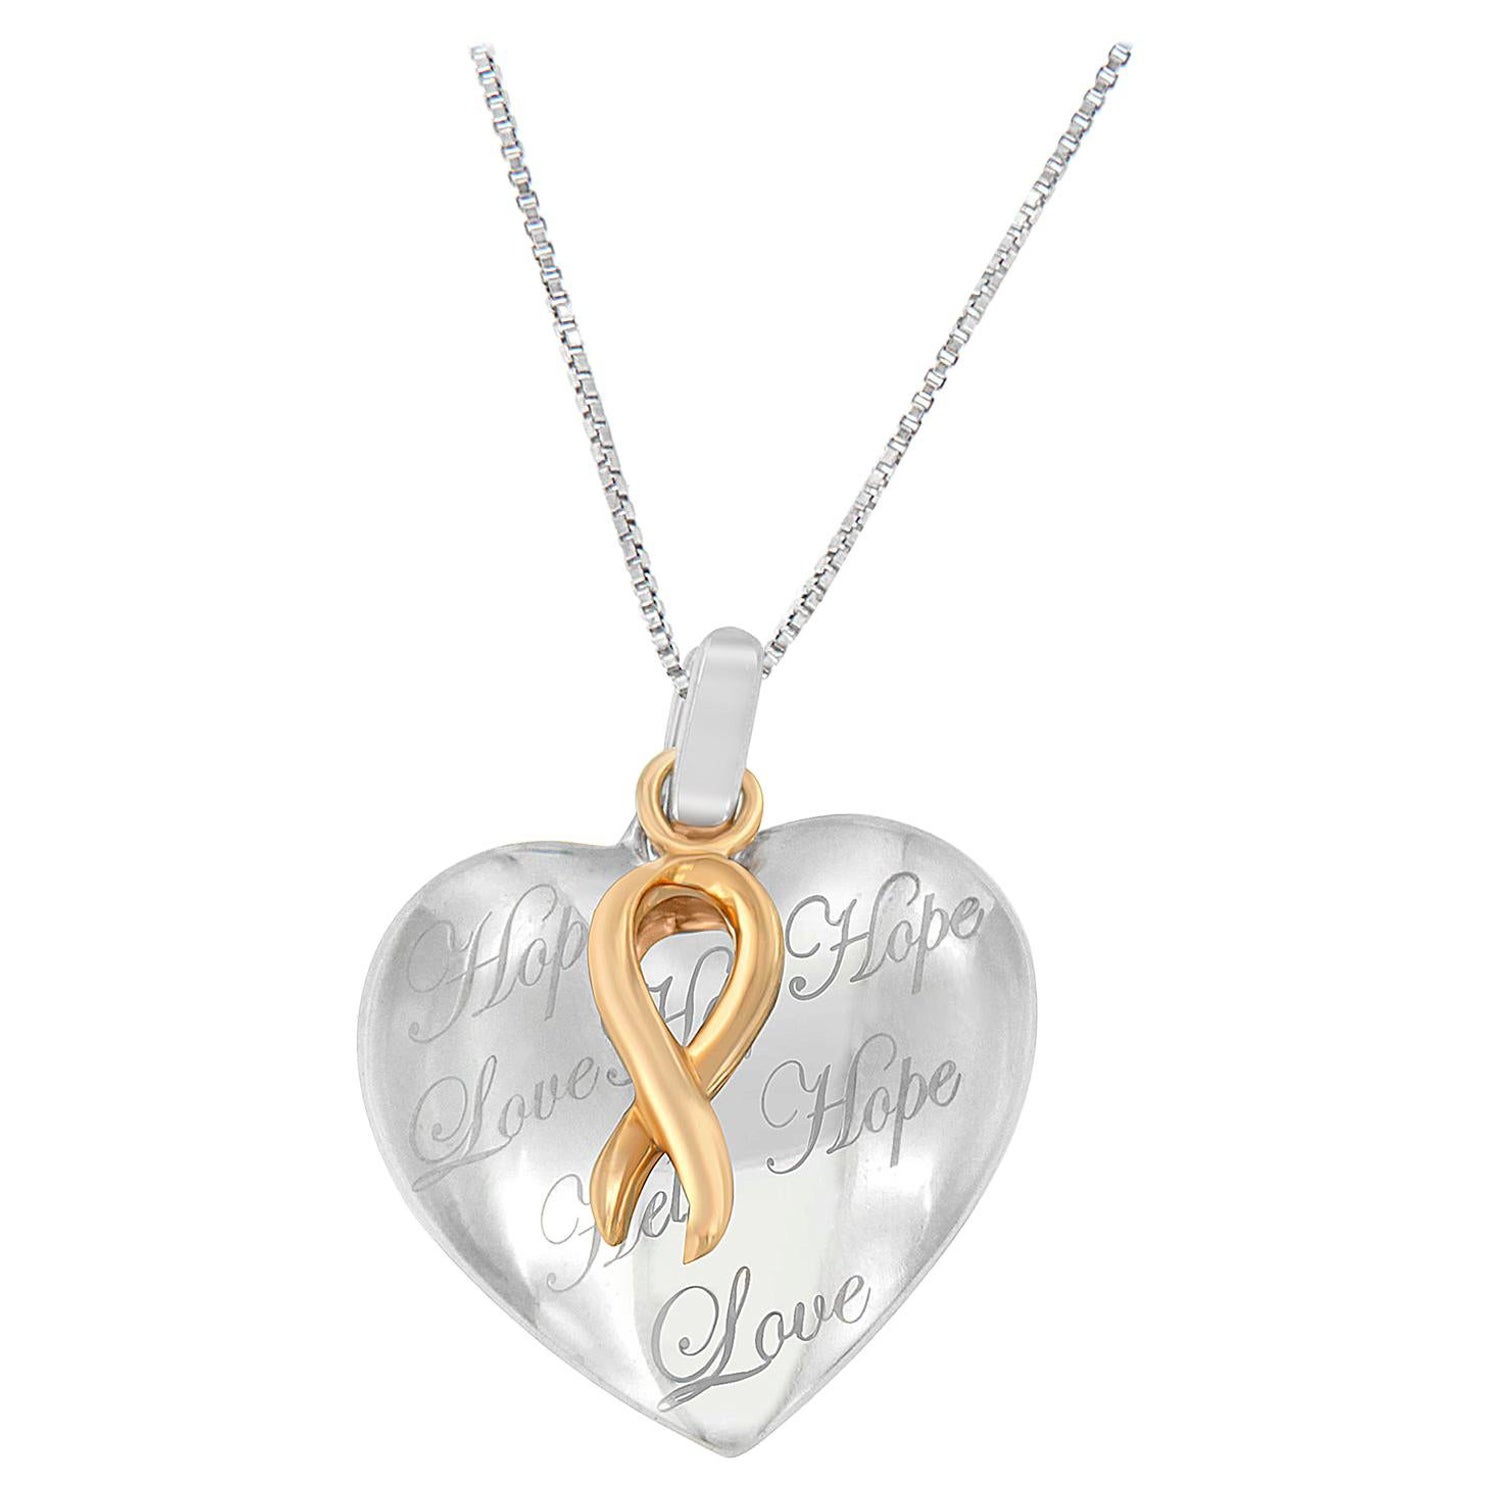 10k Gold Over Silver Heart Pendant Necklace